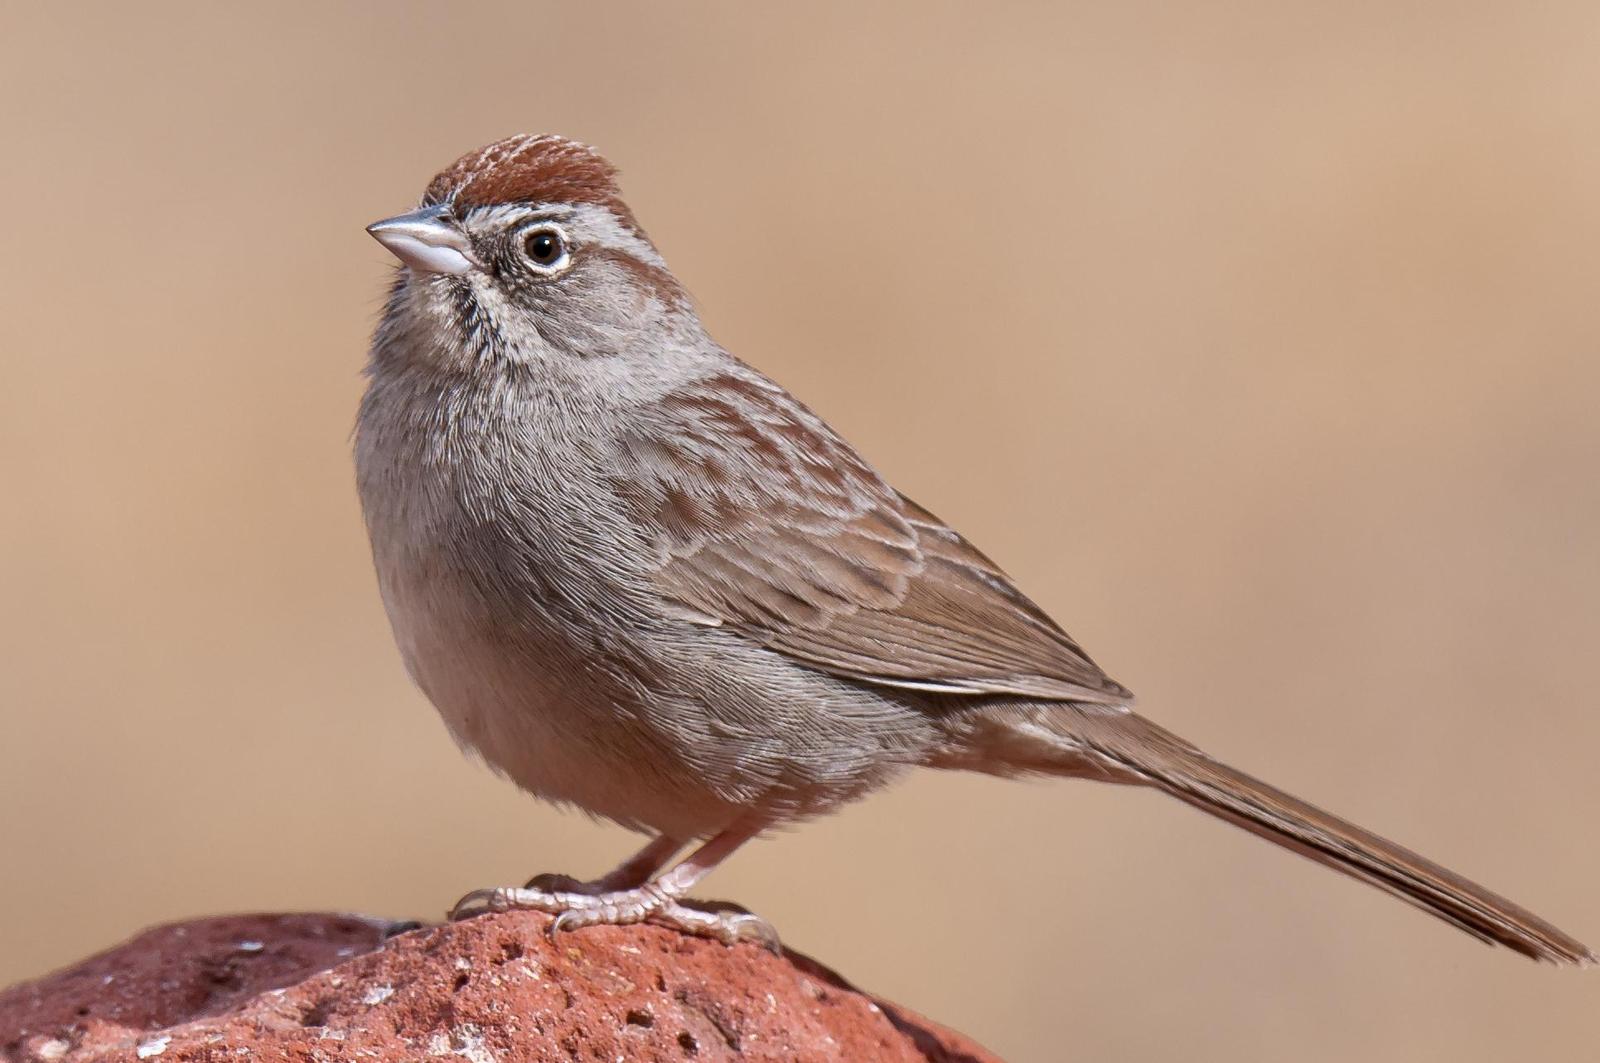 Rufous-crowned Sparrow Photo by Mason Rose